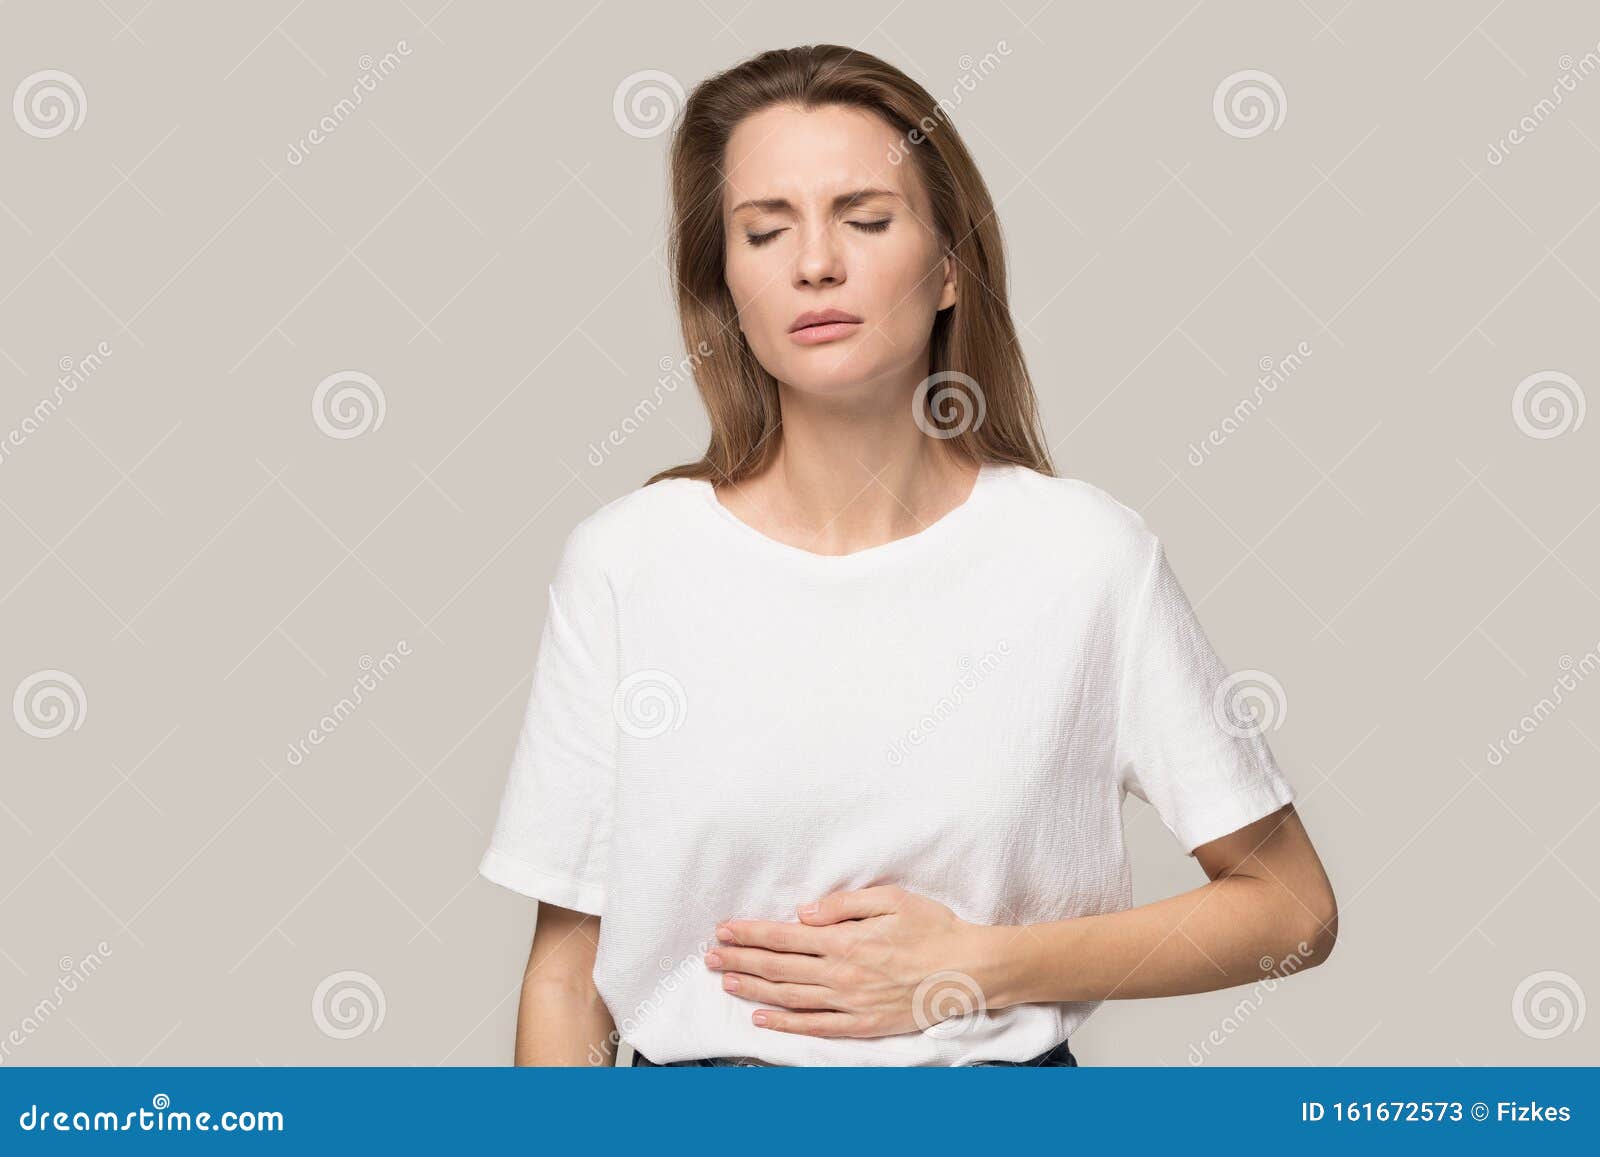 sick young woman touch stomach suffer from indigestion